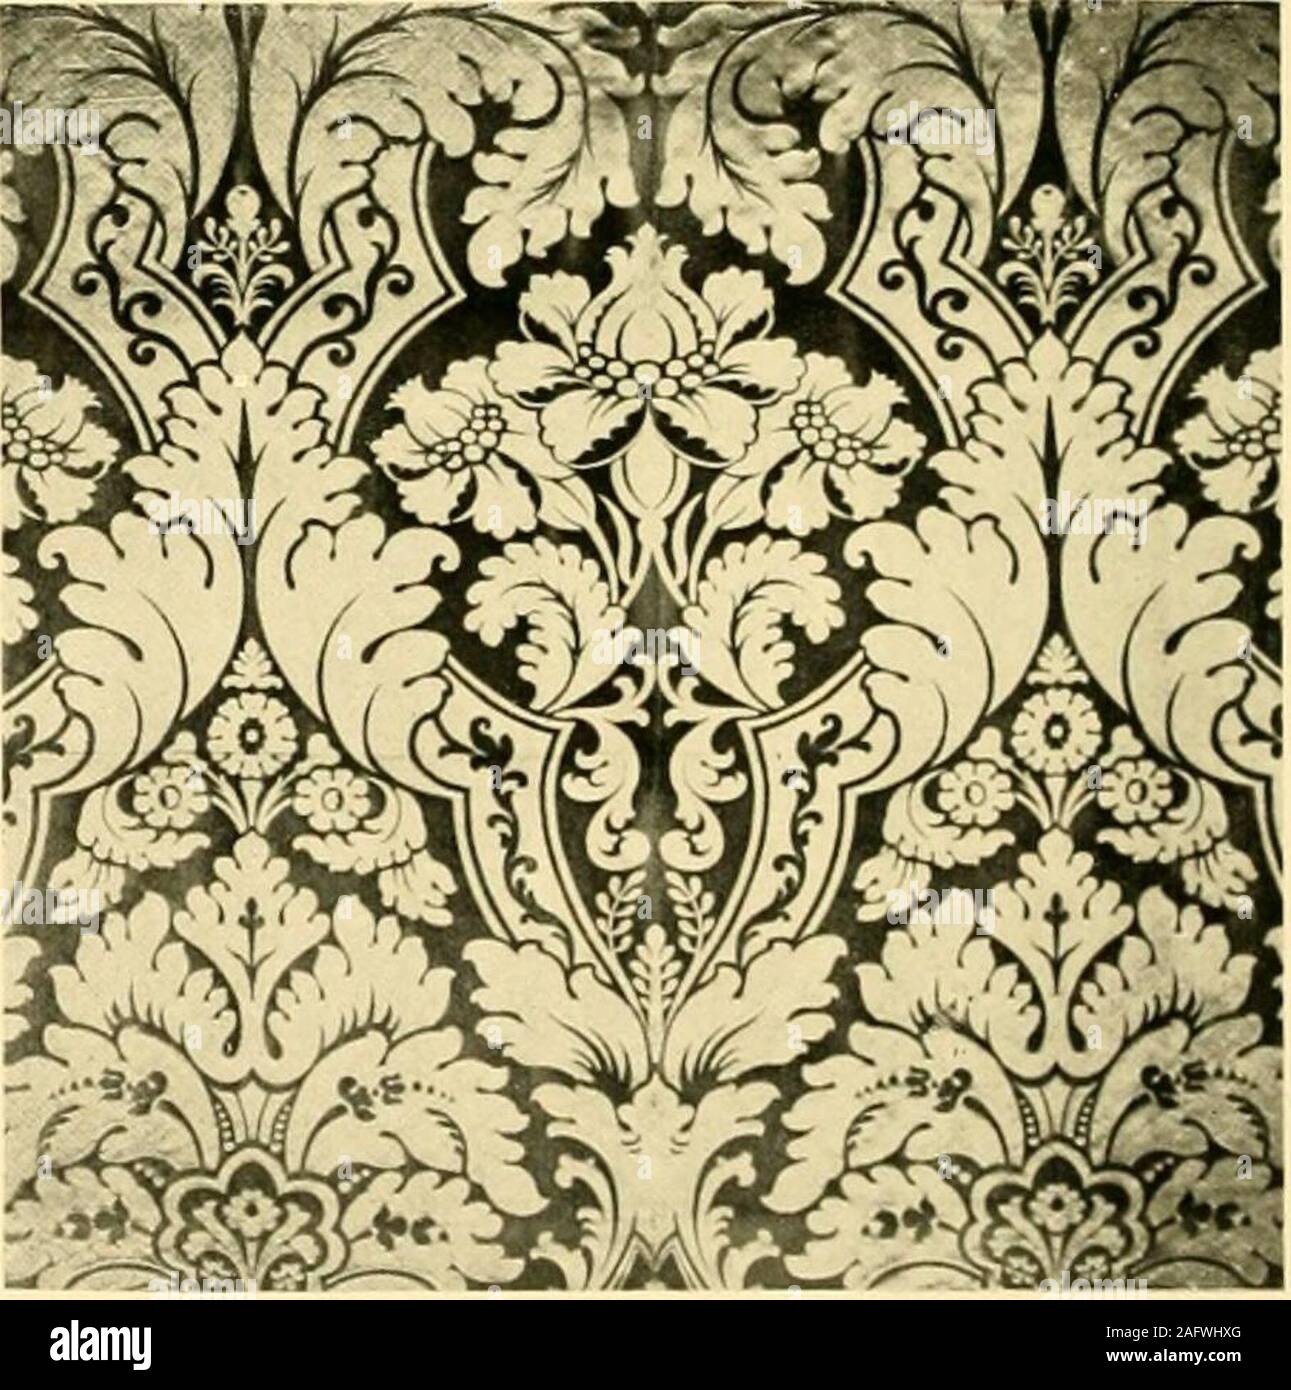 . Decorative textiles; an illustrated book on coverings for furniture, walls and floors, including damasks, brocades and velvets, tapestries, laces, embroideries, chintzes, cretones, drapery and furniture trimmings, wall papers, carpets and rugs, tooled and illuminated leathers. Iliite 1II- AiiicriciiM ri-|)rci(liK-tiii]i cit Friiiili llallli^^k Ilatc IX—C?l?(&gt;^fi;r;liIl il.imask. iiKide in .iiicric-,i 10 DAMASKS. BROCADES AND VELVETS line effects to suggest ribs running the way of the wefts. Plate XX,though sometimes called a silk tapestry, is properly classed withbrocades. It has a Pers Stock Photo